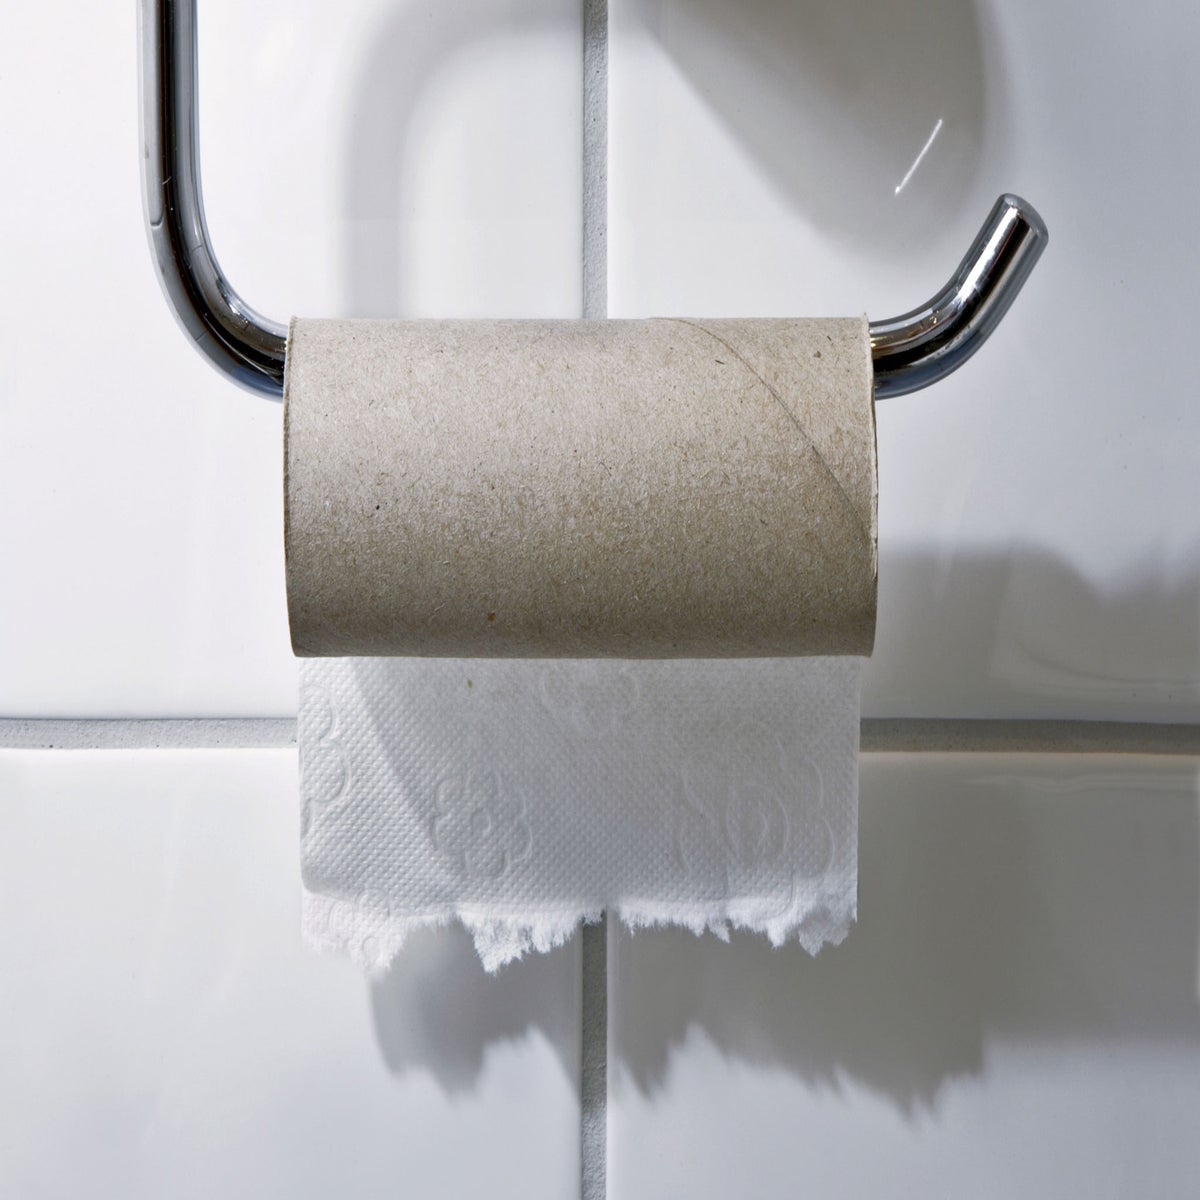 Toilet paper rolls in the US are steadily shrinking. This is why